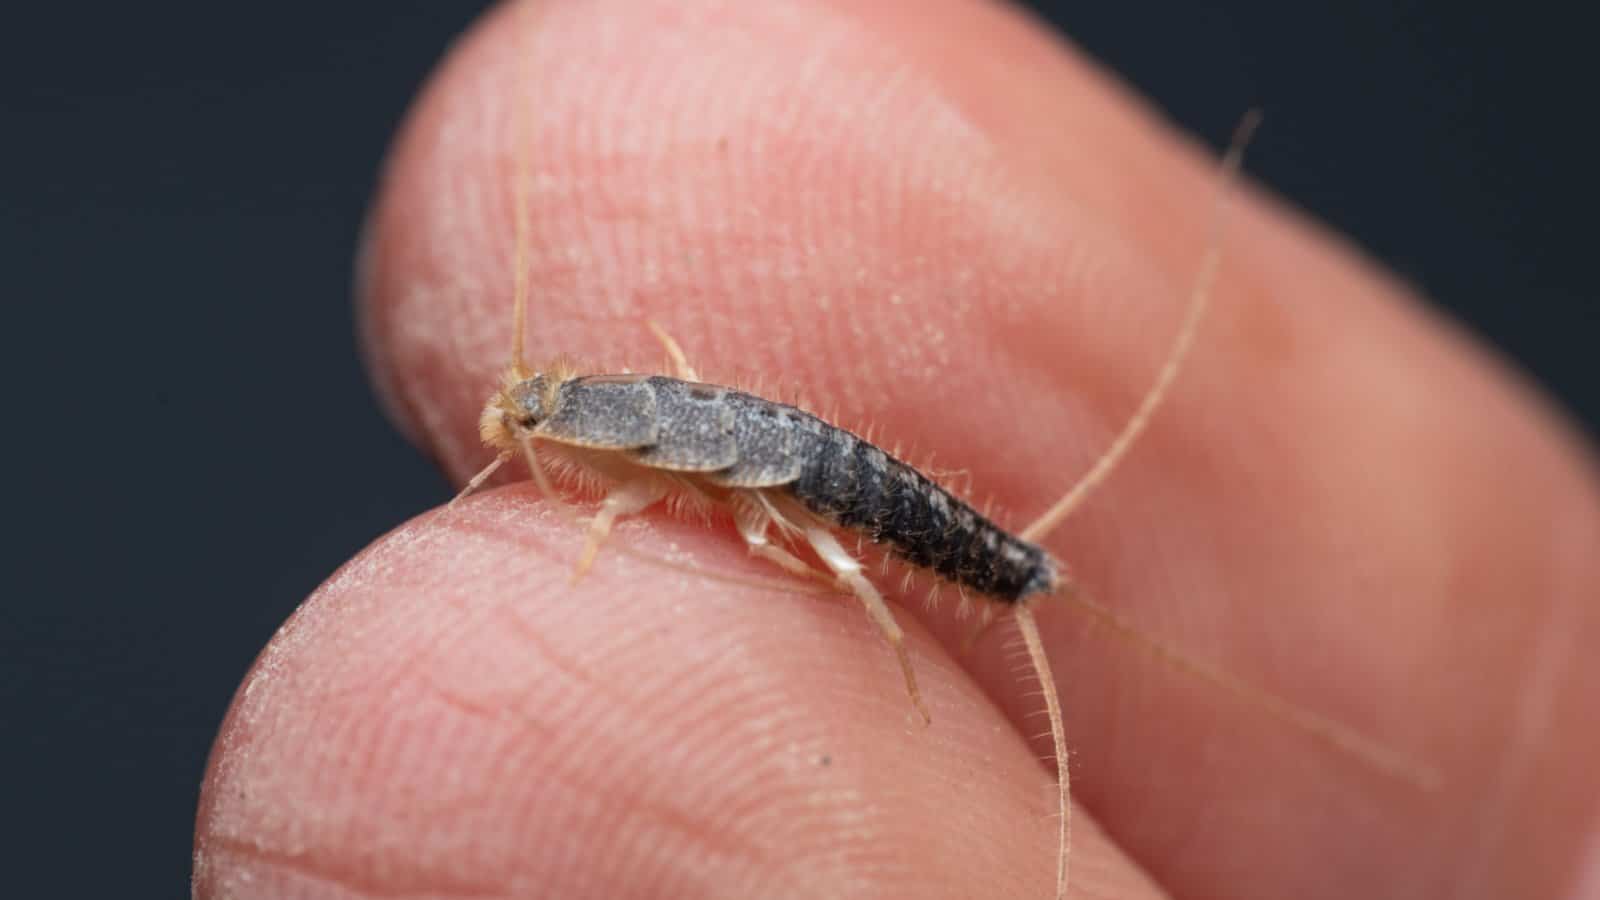 A pest control expert from Pest Me Off holding a silverfish, showcasing their expertise in pest removal